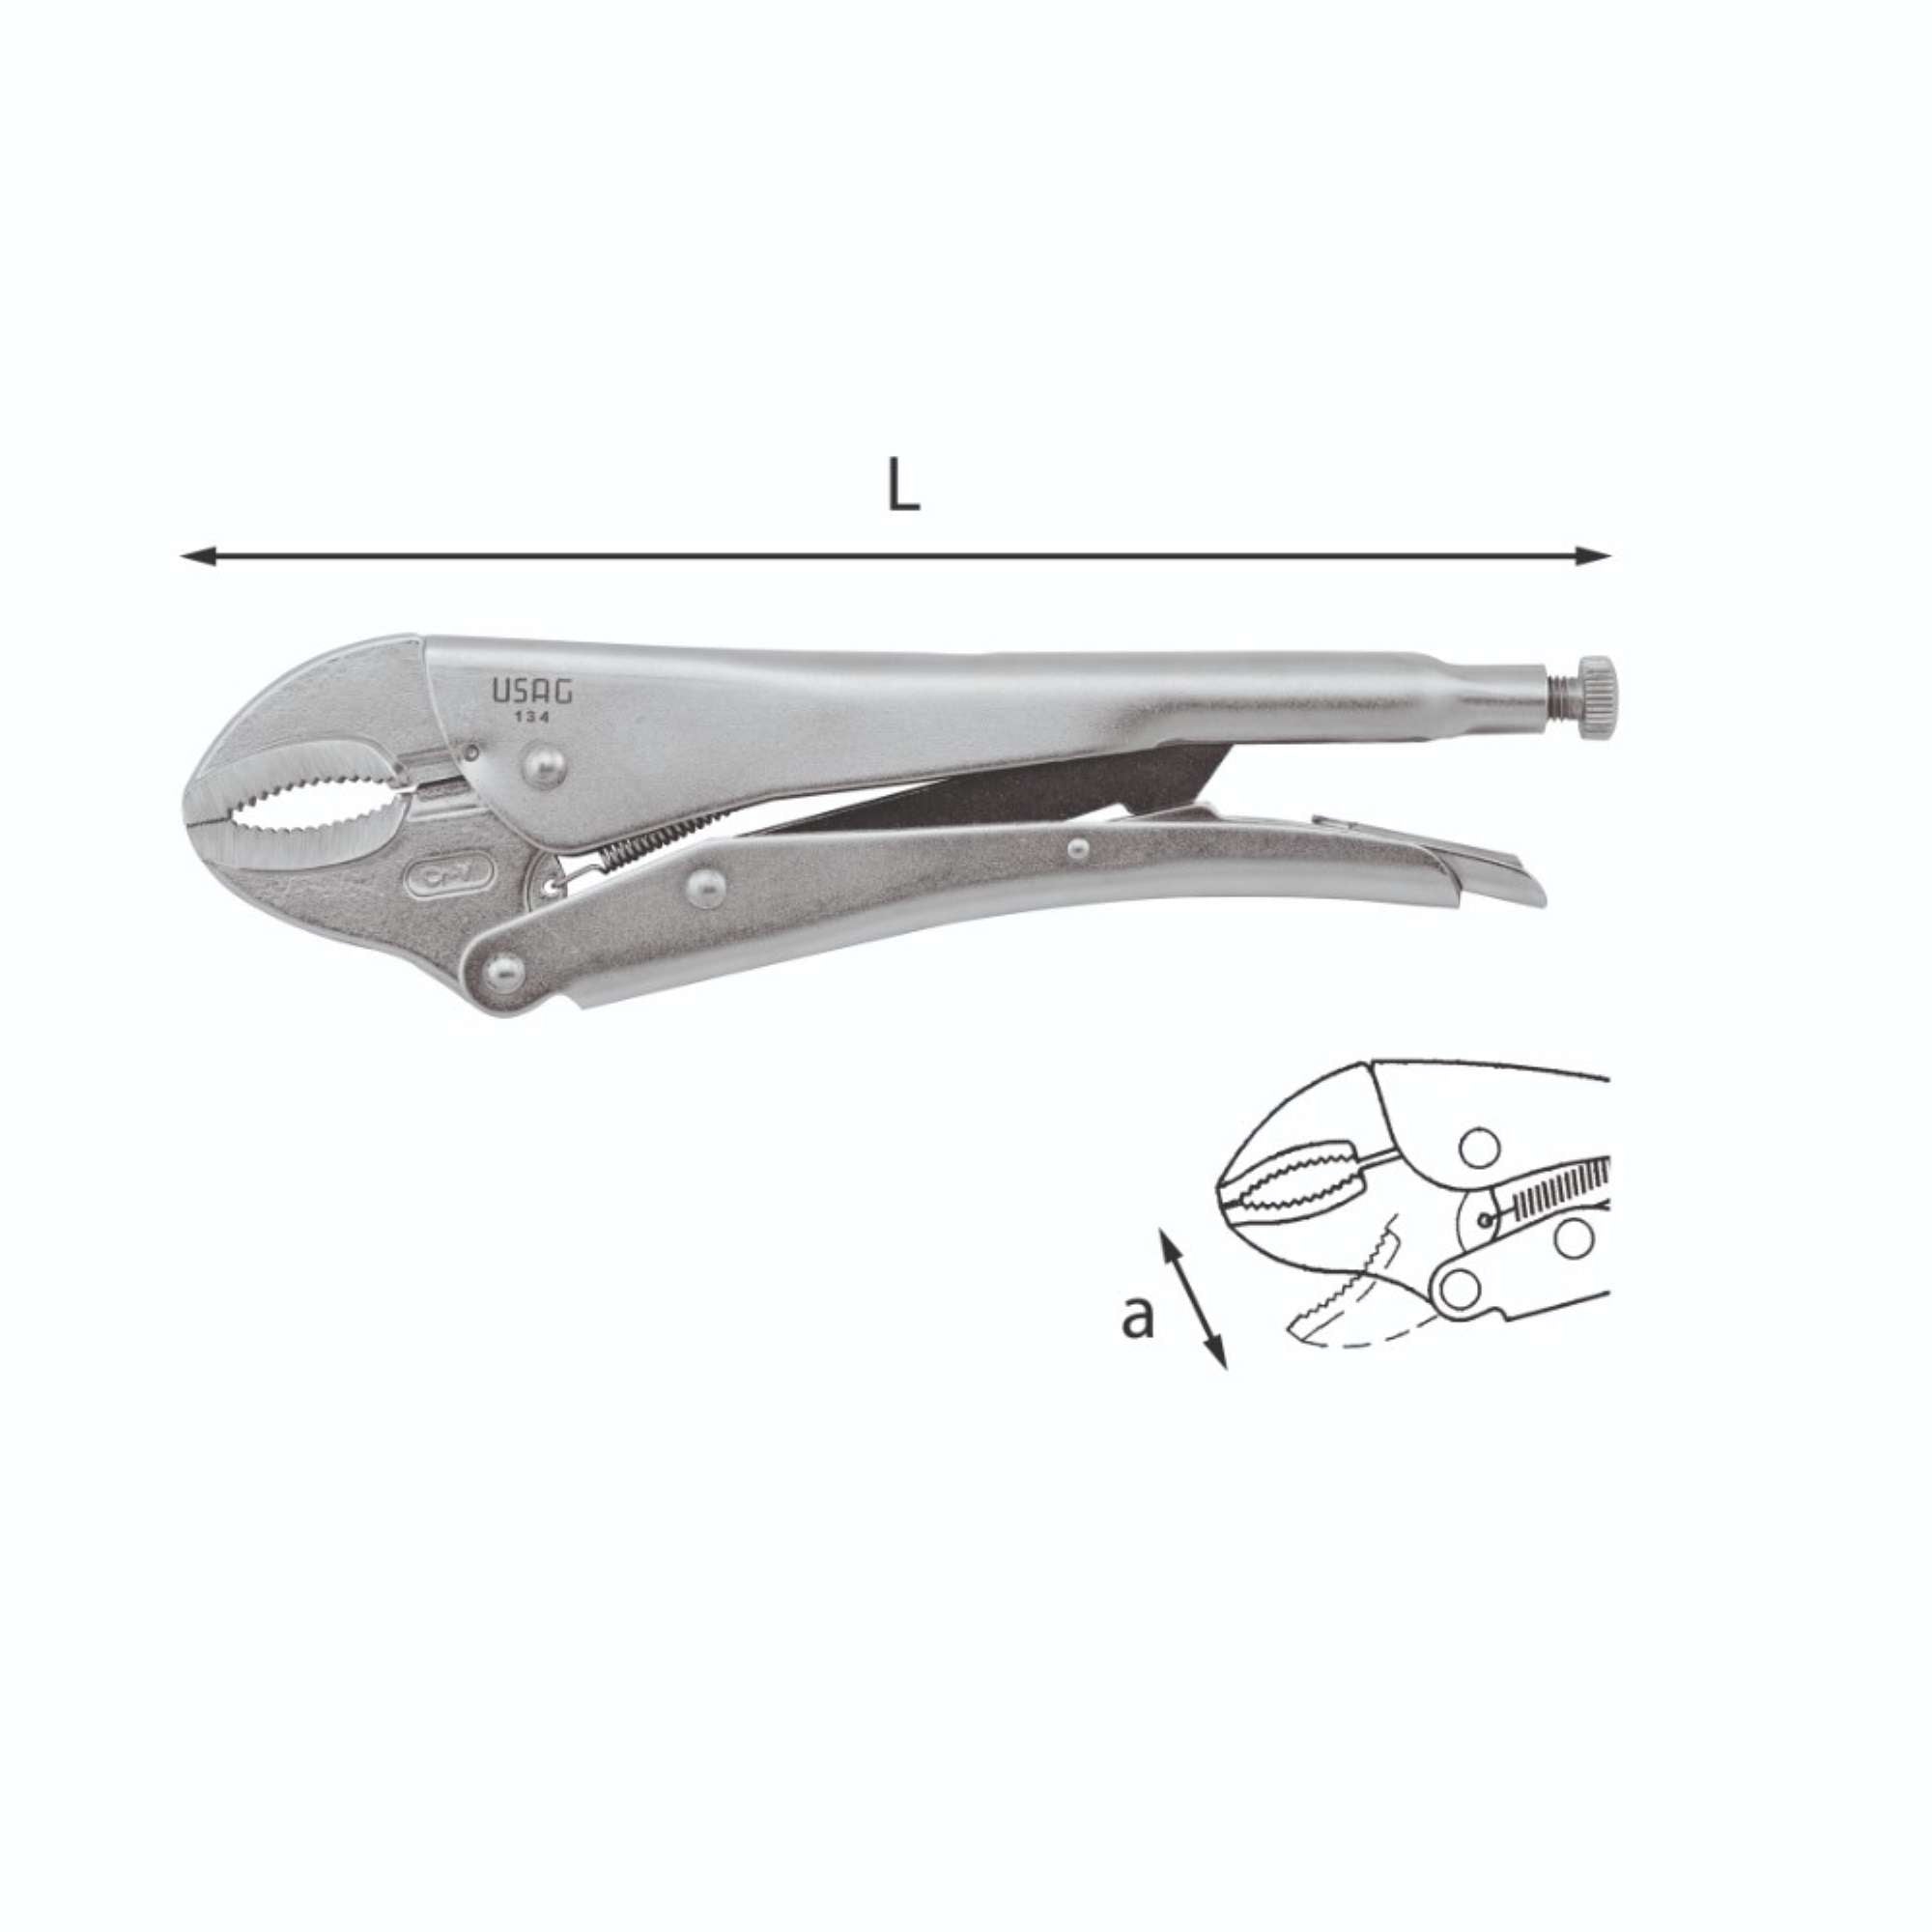 Adjustable self-locking pliers with concave jaws - Usag 134